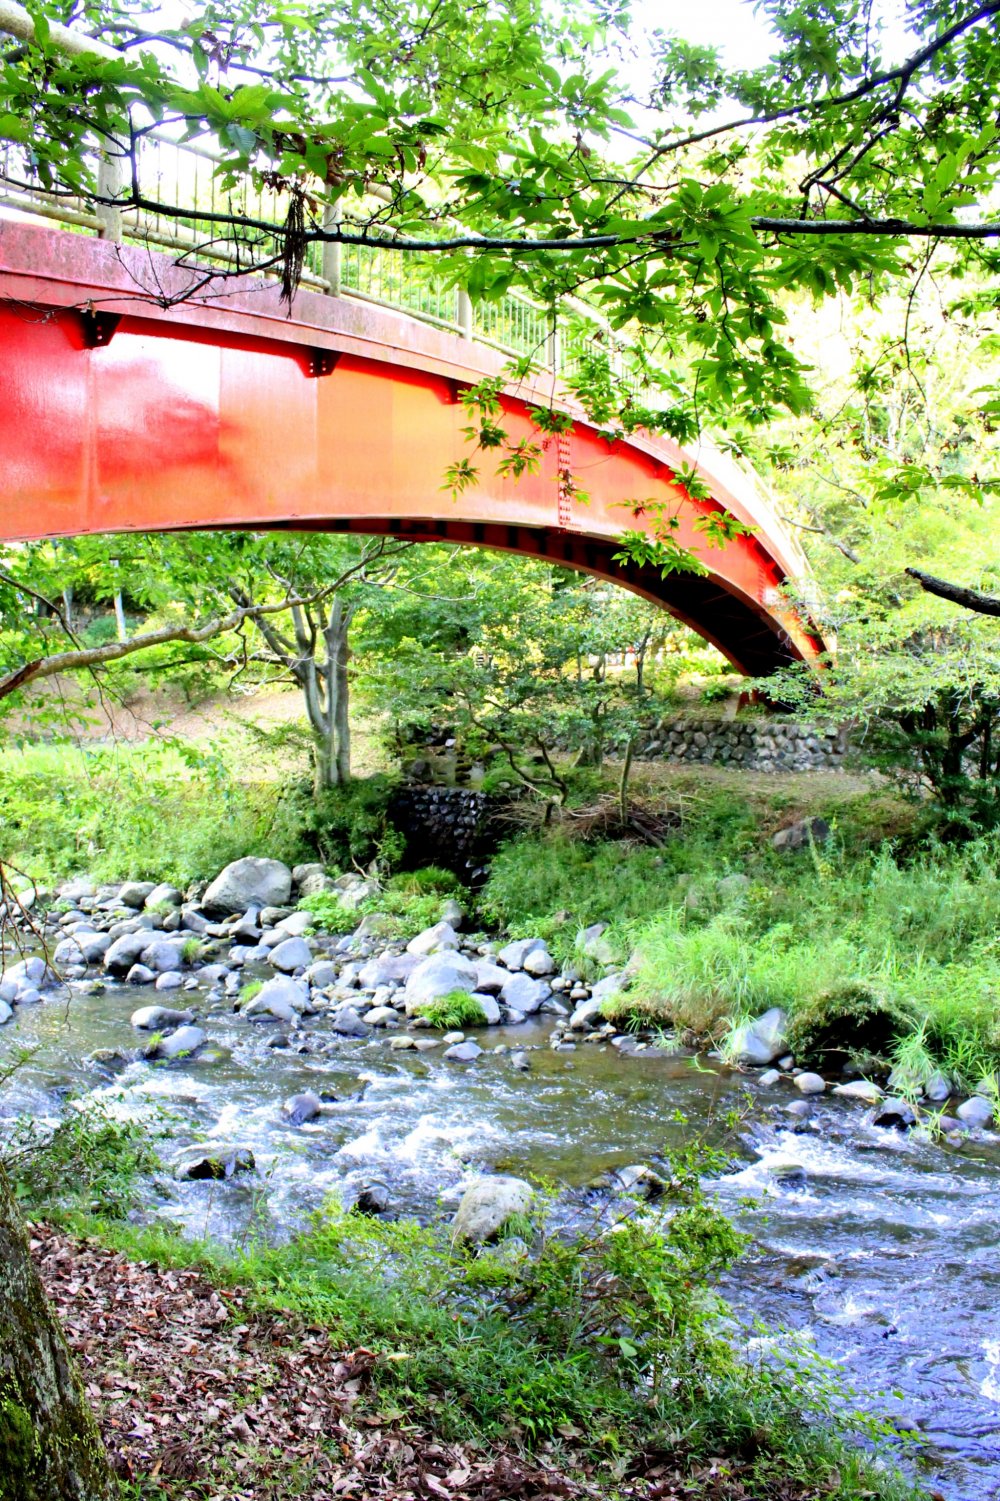 The red bridge over the shallow rushing waters gives a perfect contrast to the green surroundings